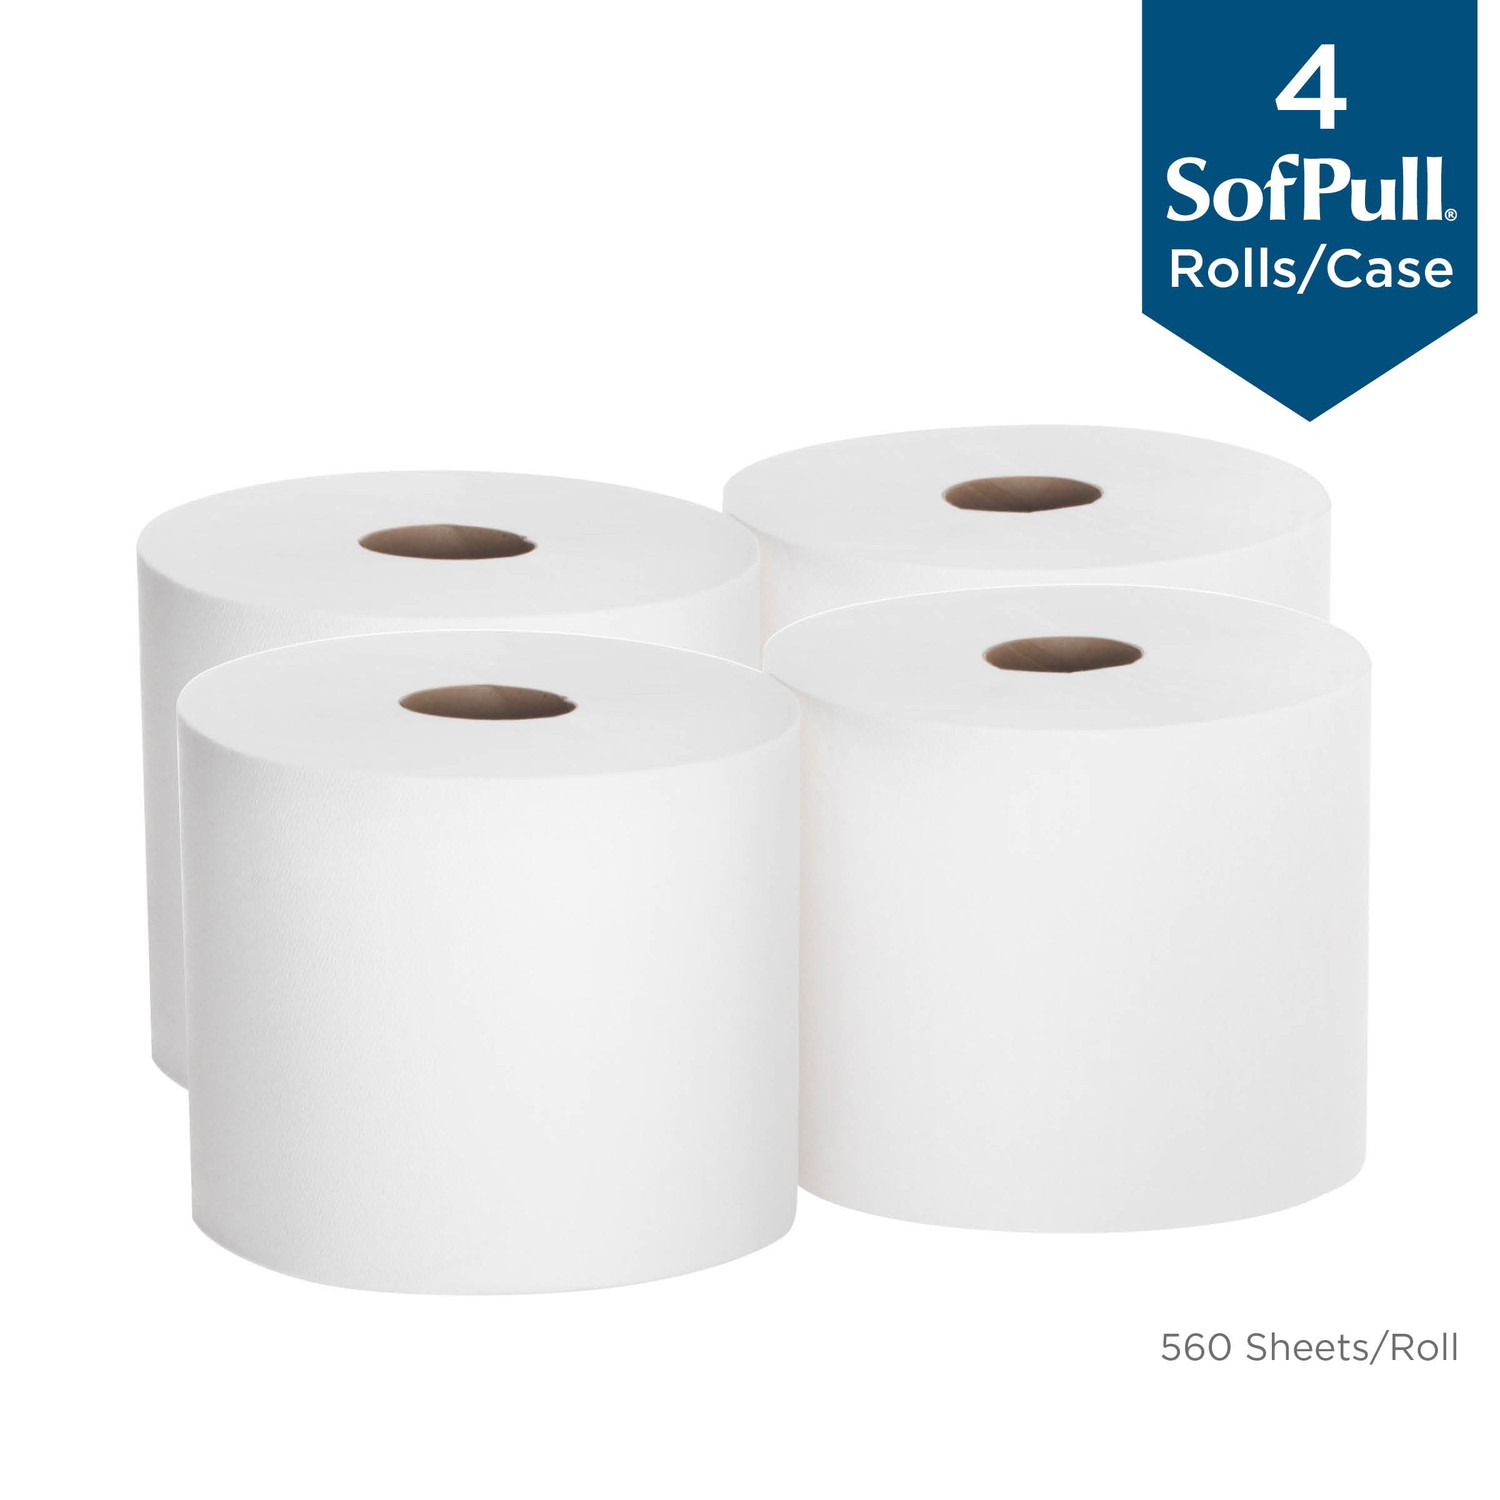 SofPull Centerpull High-Capacity Paper Towels - 15" x 7.80" - 560 Sheets/Roll - White - Paper - Absorbent, Soft - For Healthcare